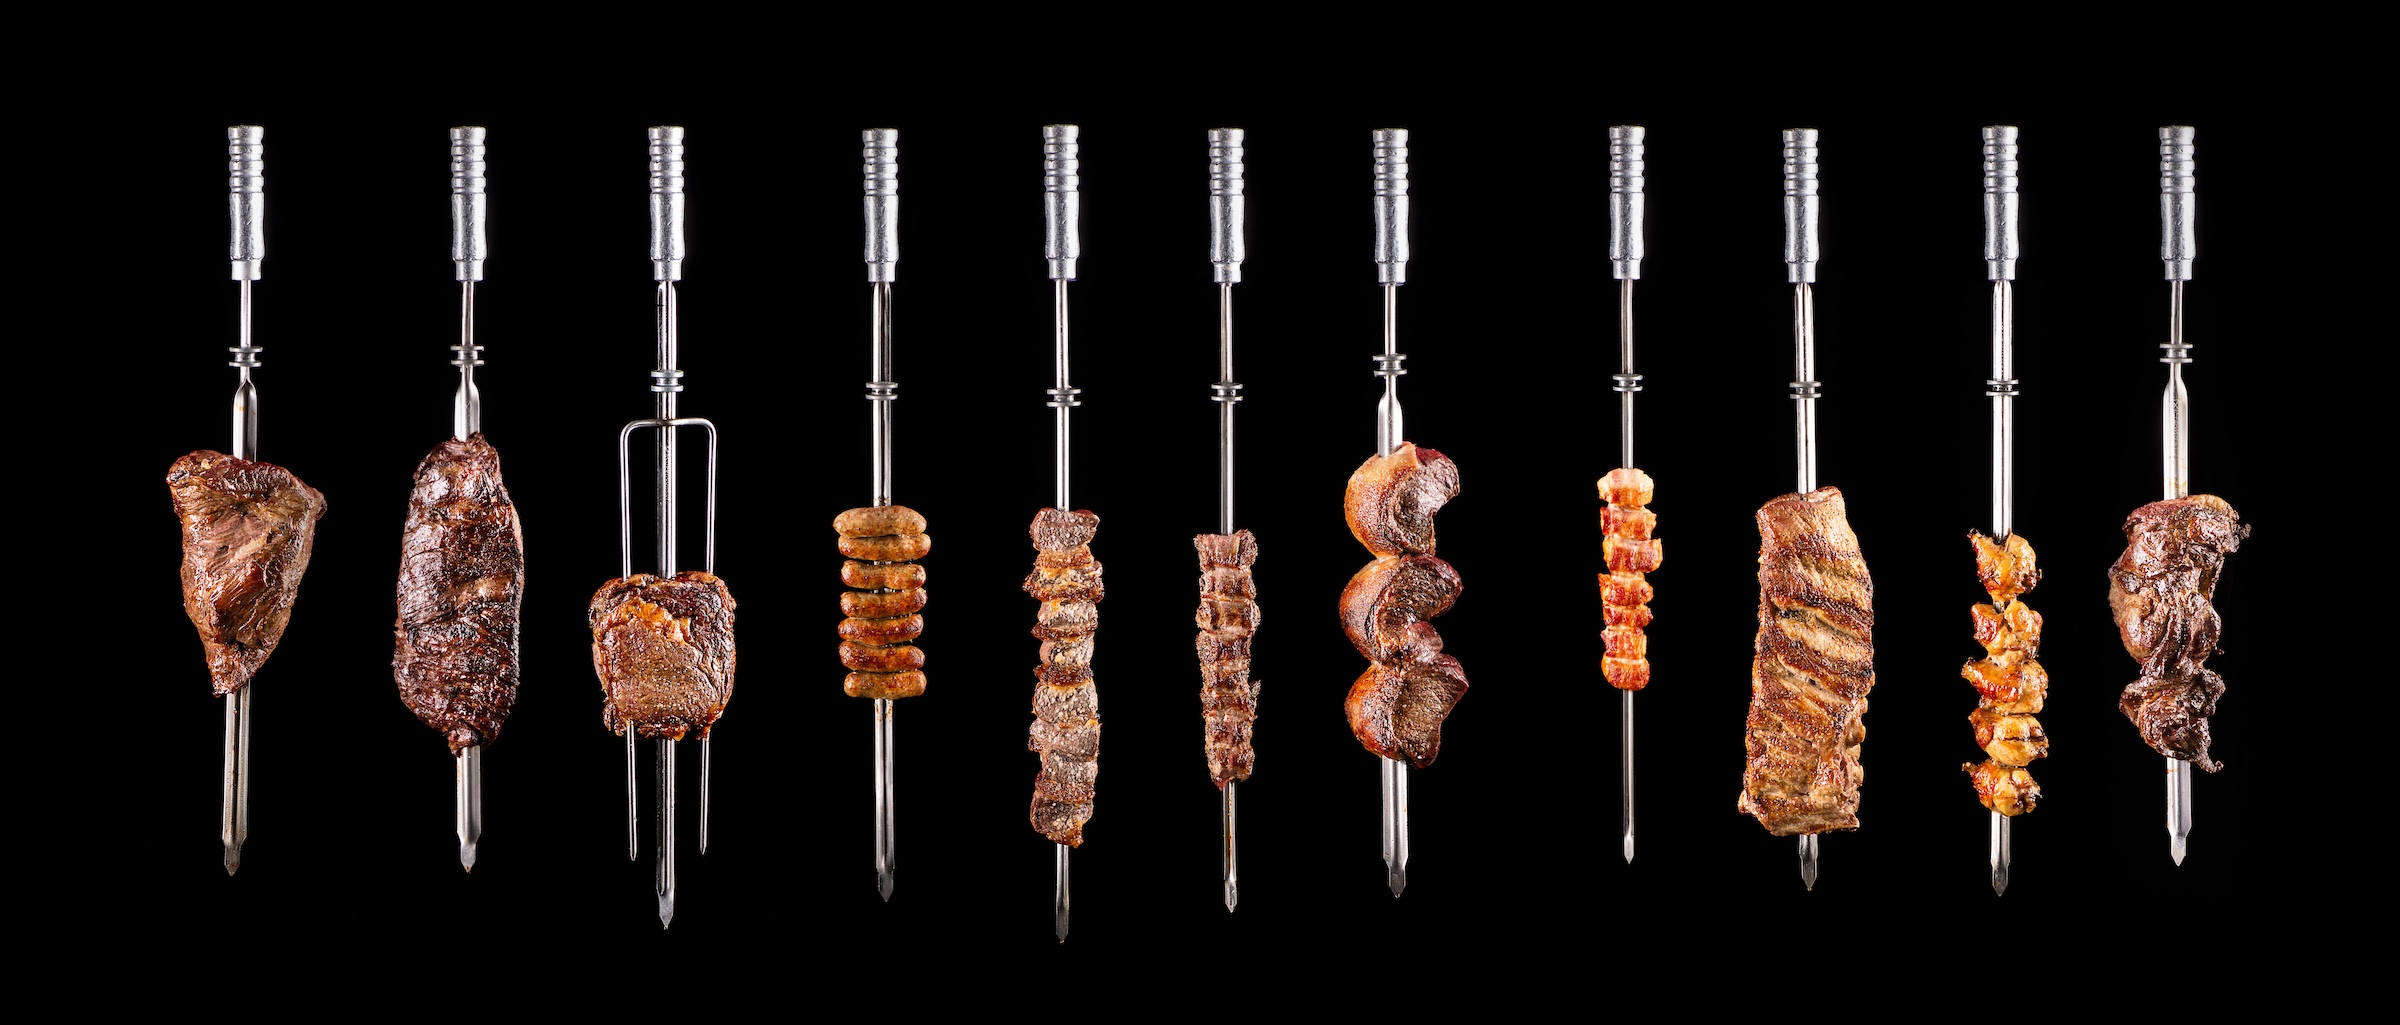 Traditional Brazilian barbecue meats on skewers on a black background